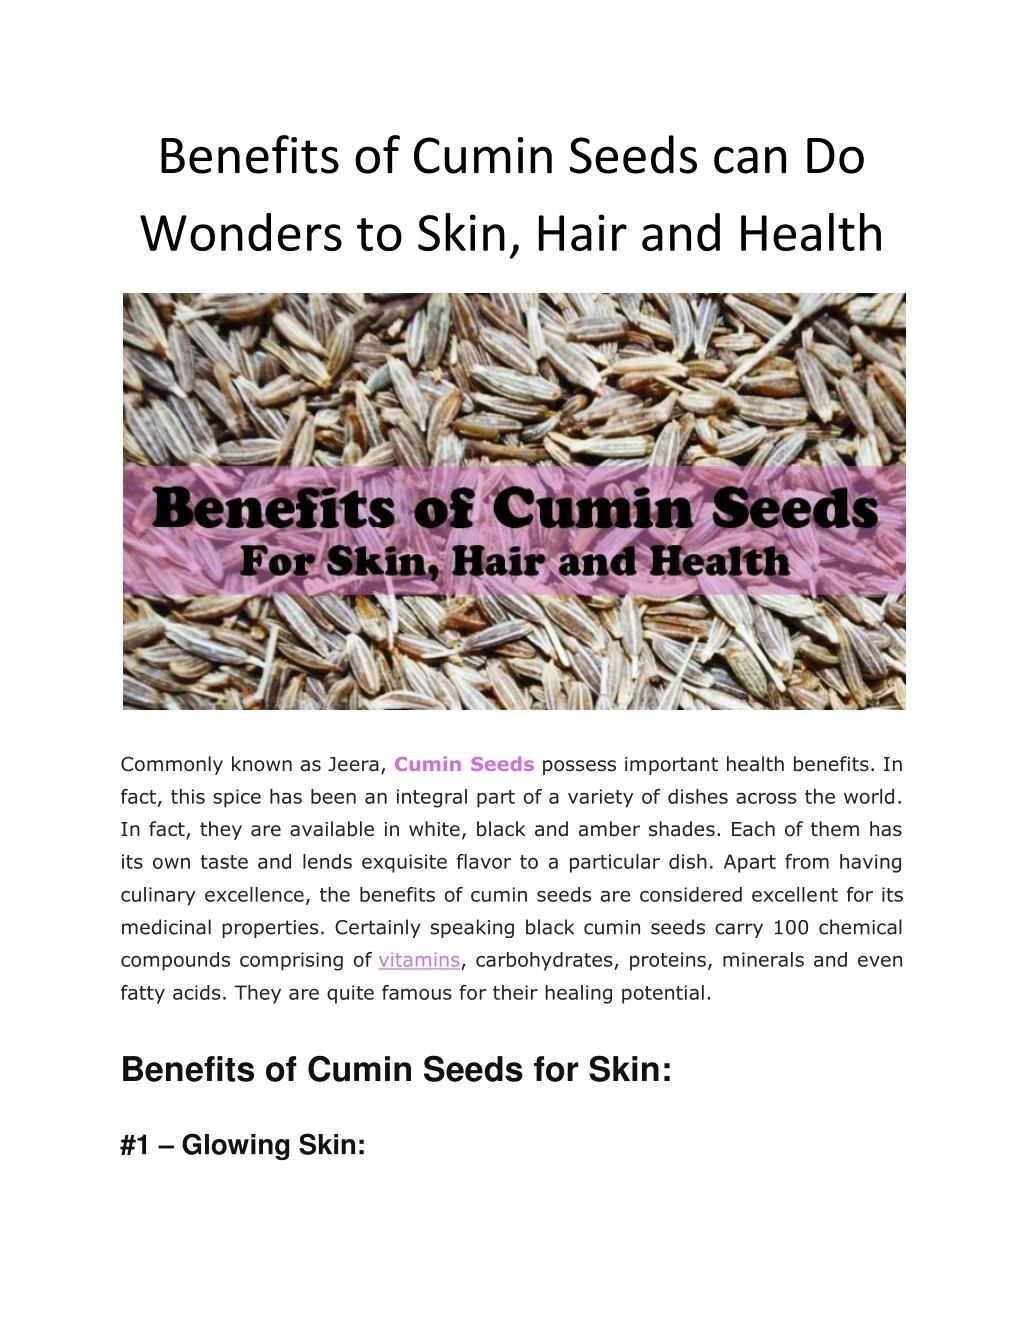 benefits of cumin seeds can do wonders to skin